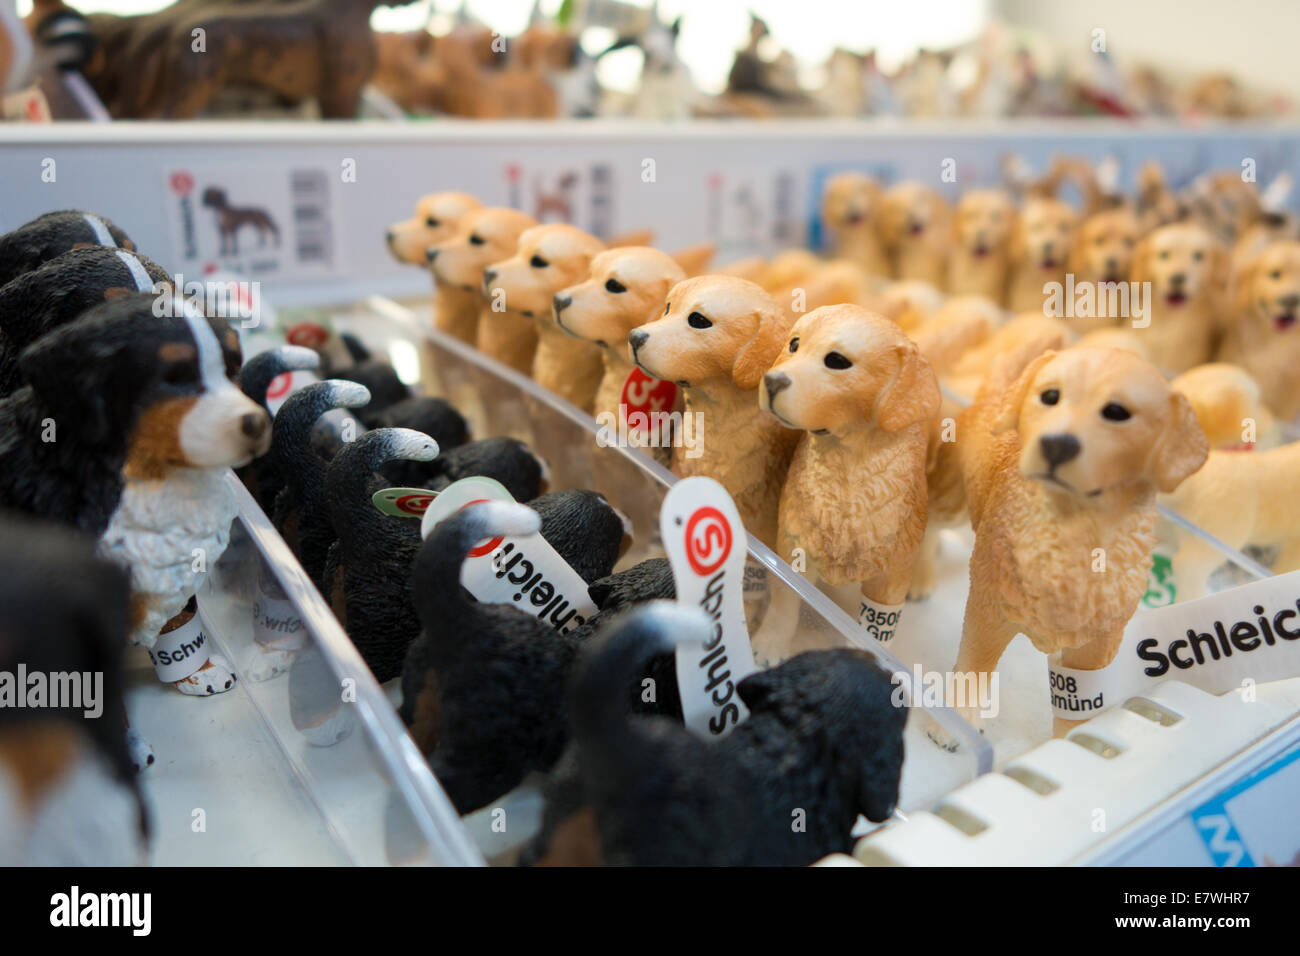 Rows of toy dog figurines are lined up on a shelf in a toy store. Golden retrievers and other breeds. Stock Photo